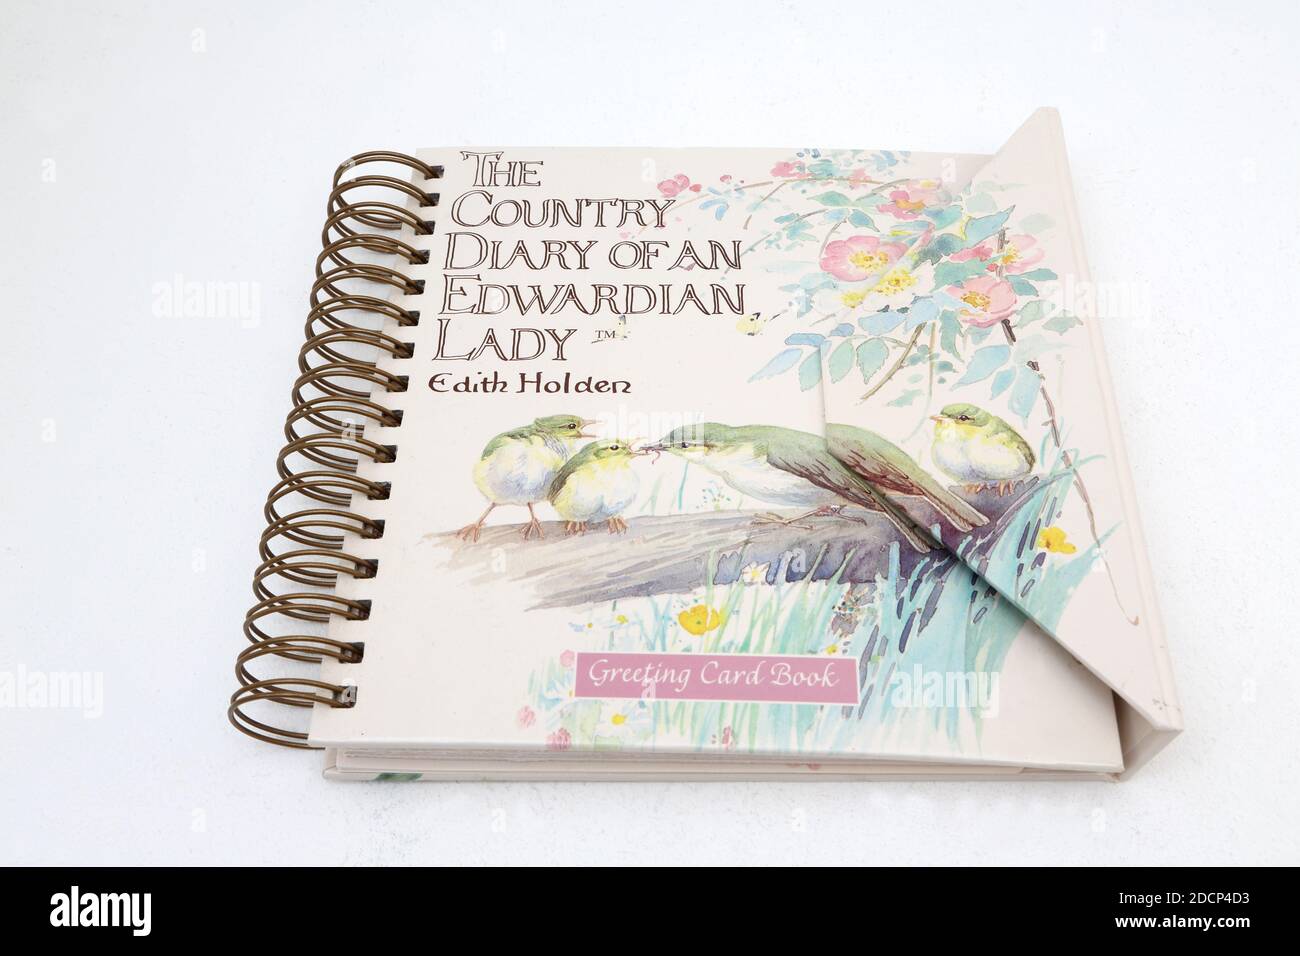 the Country Diary of an Edwardian Lady by Edith Holden Greeting Card Book Stock Photo